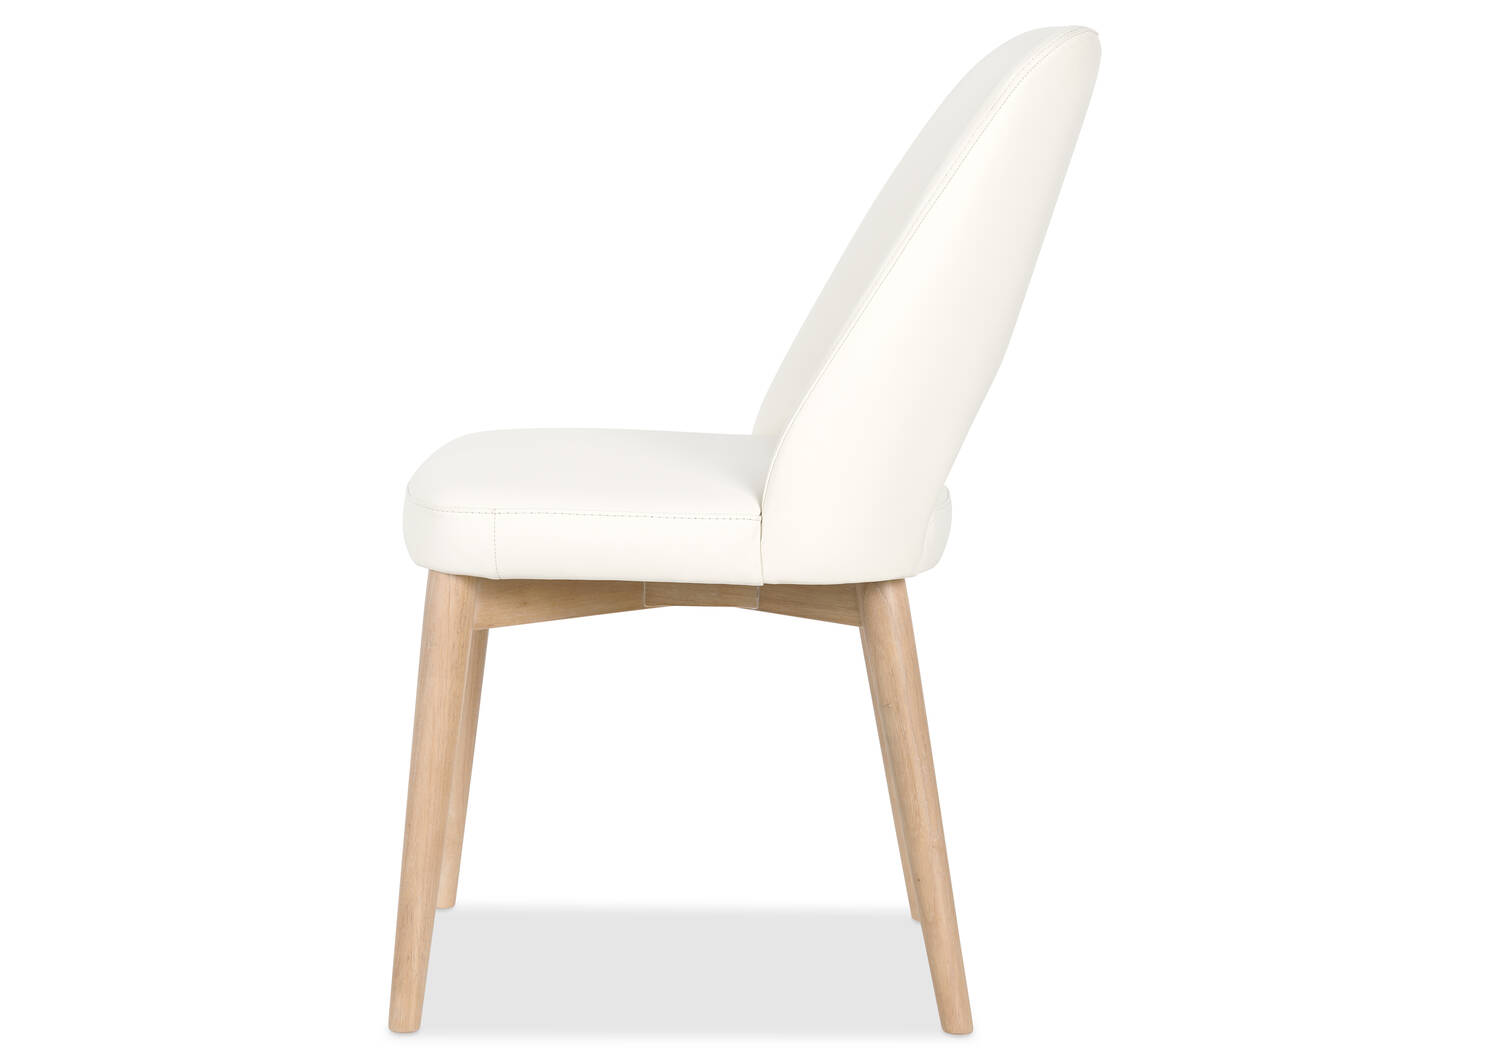 Avola Leather Dining Chair -Trina White